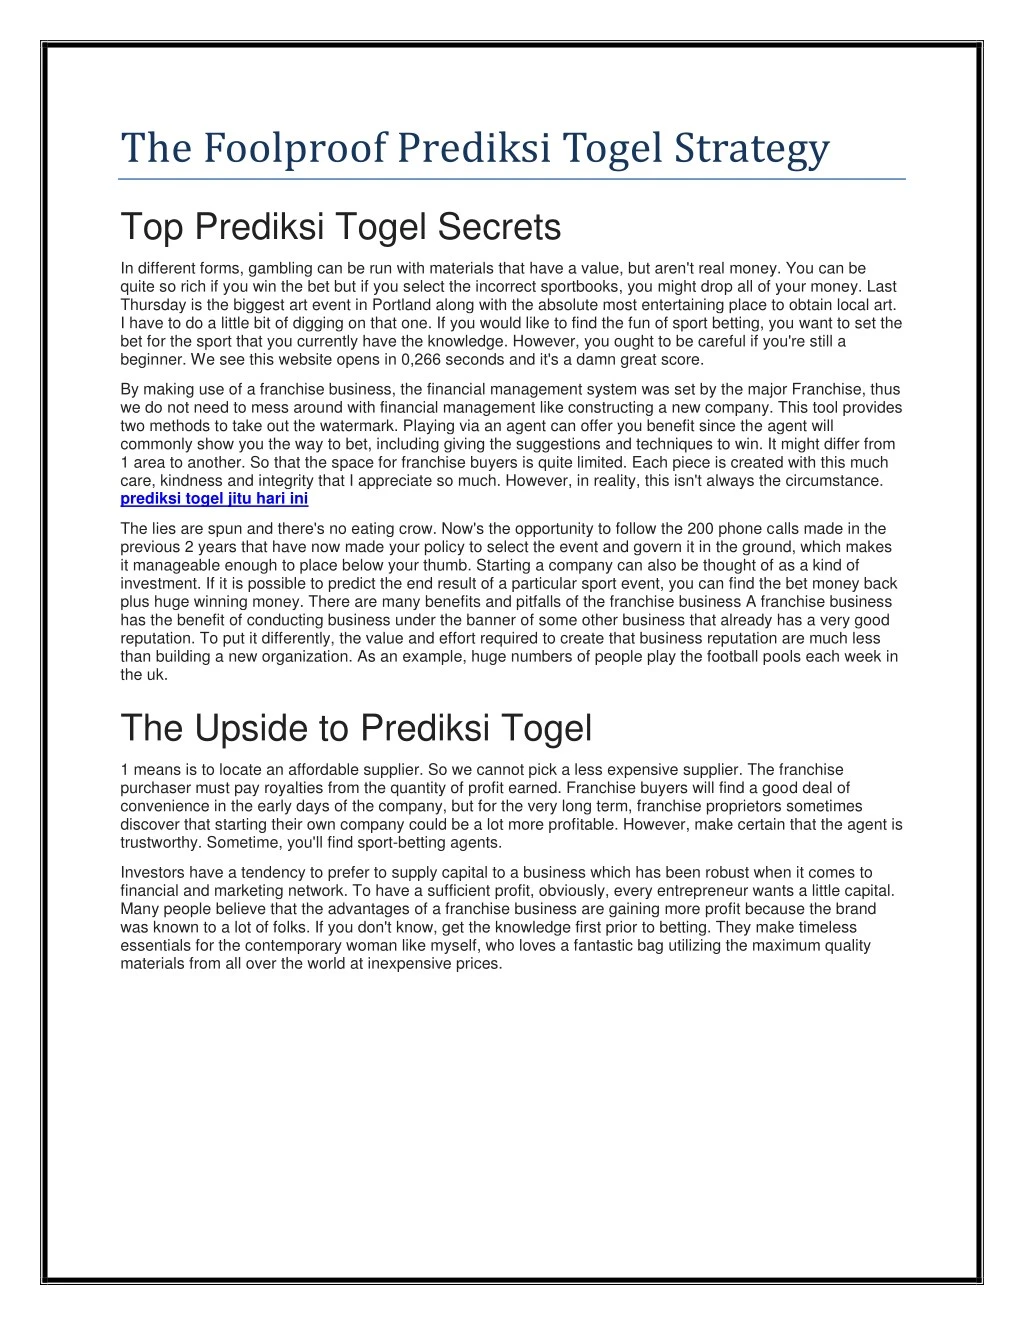 the foolproof prediksi togel strategy